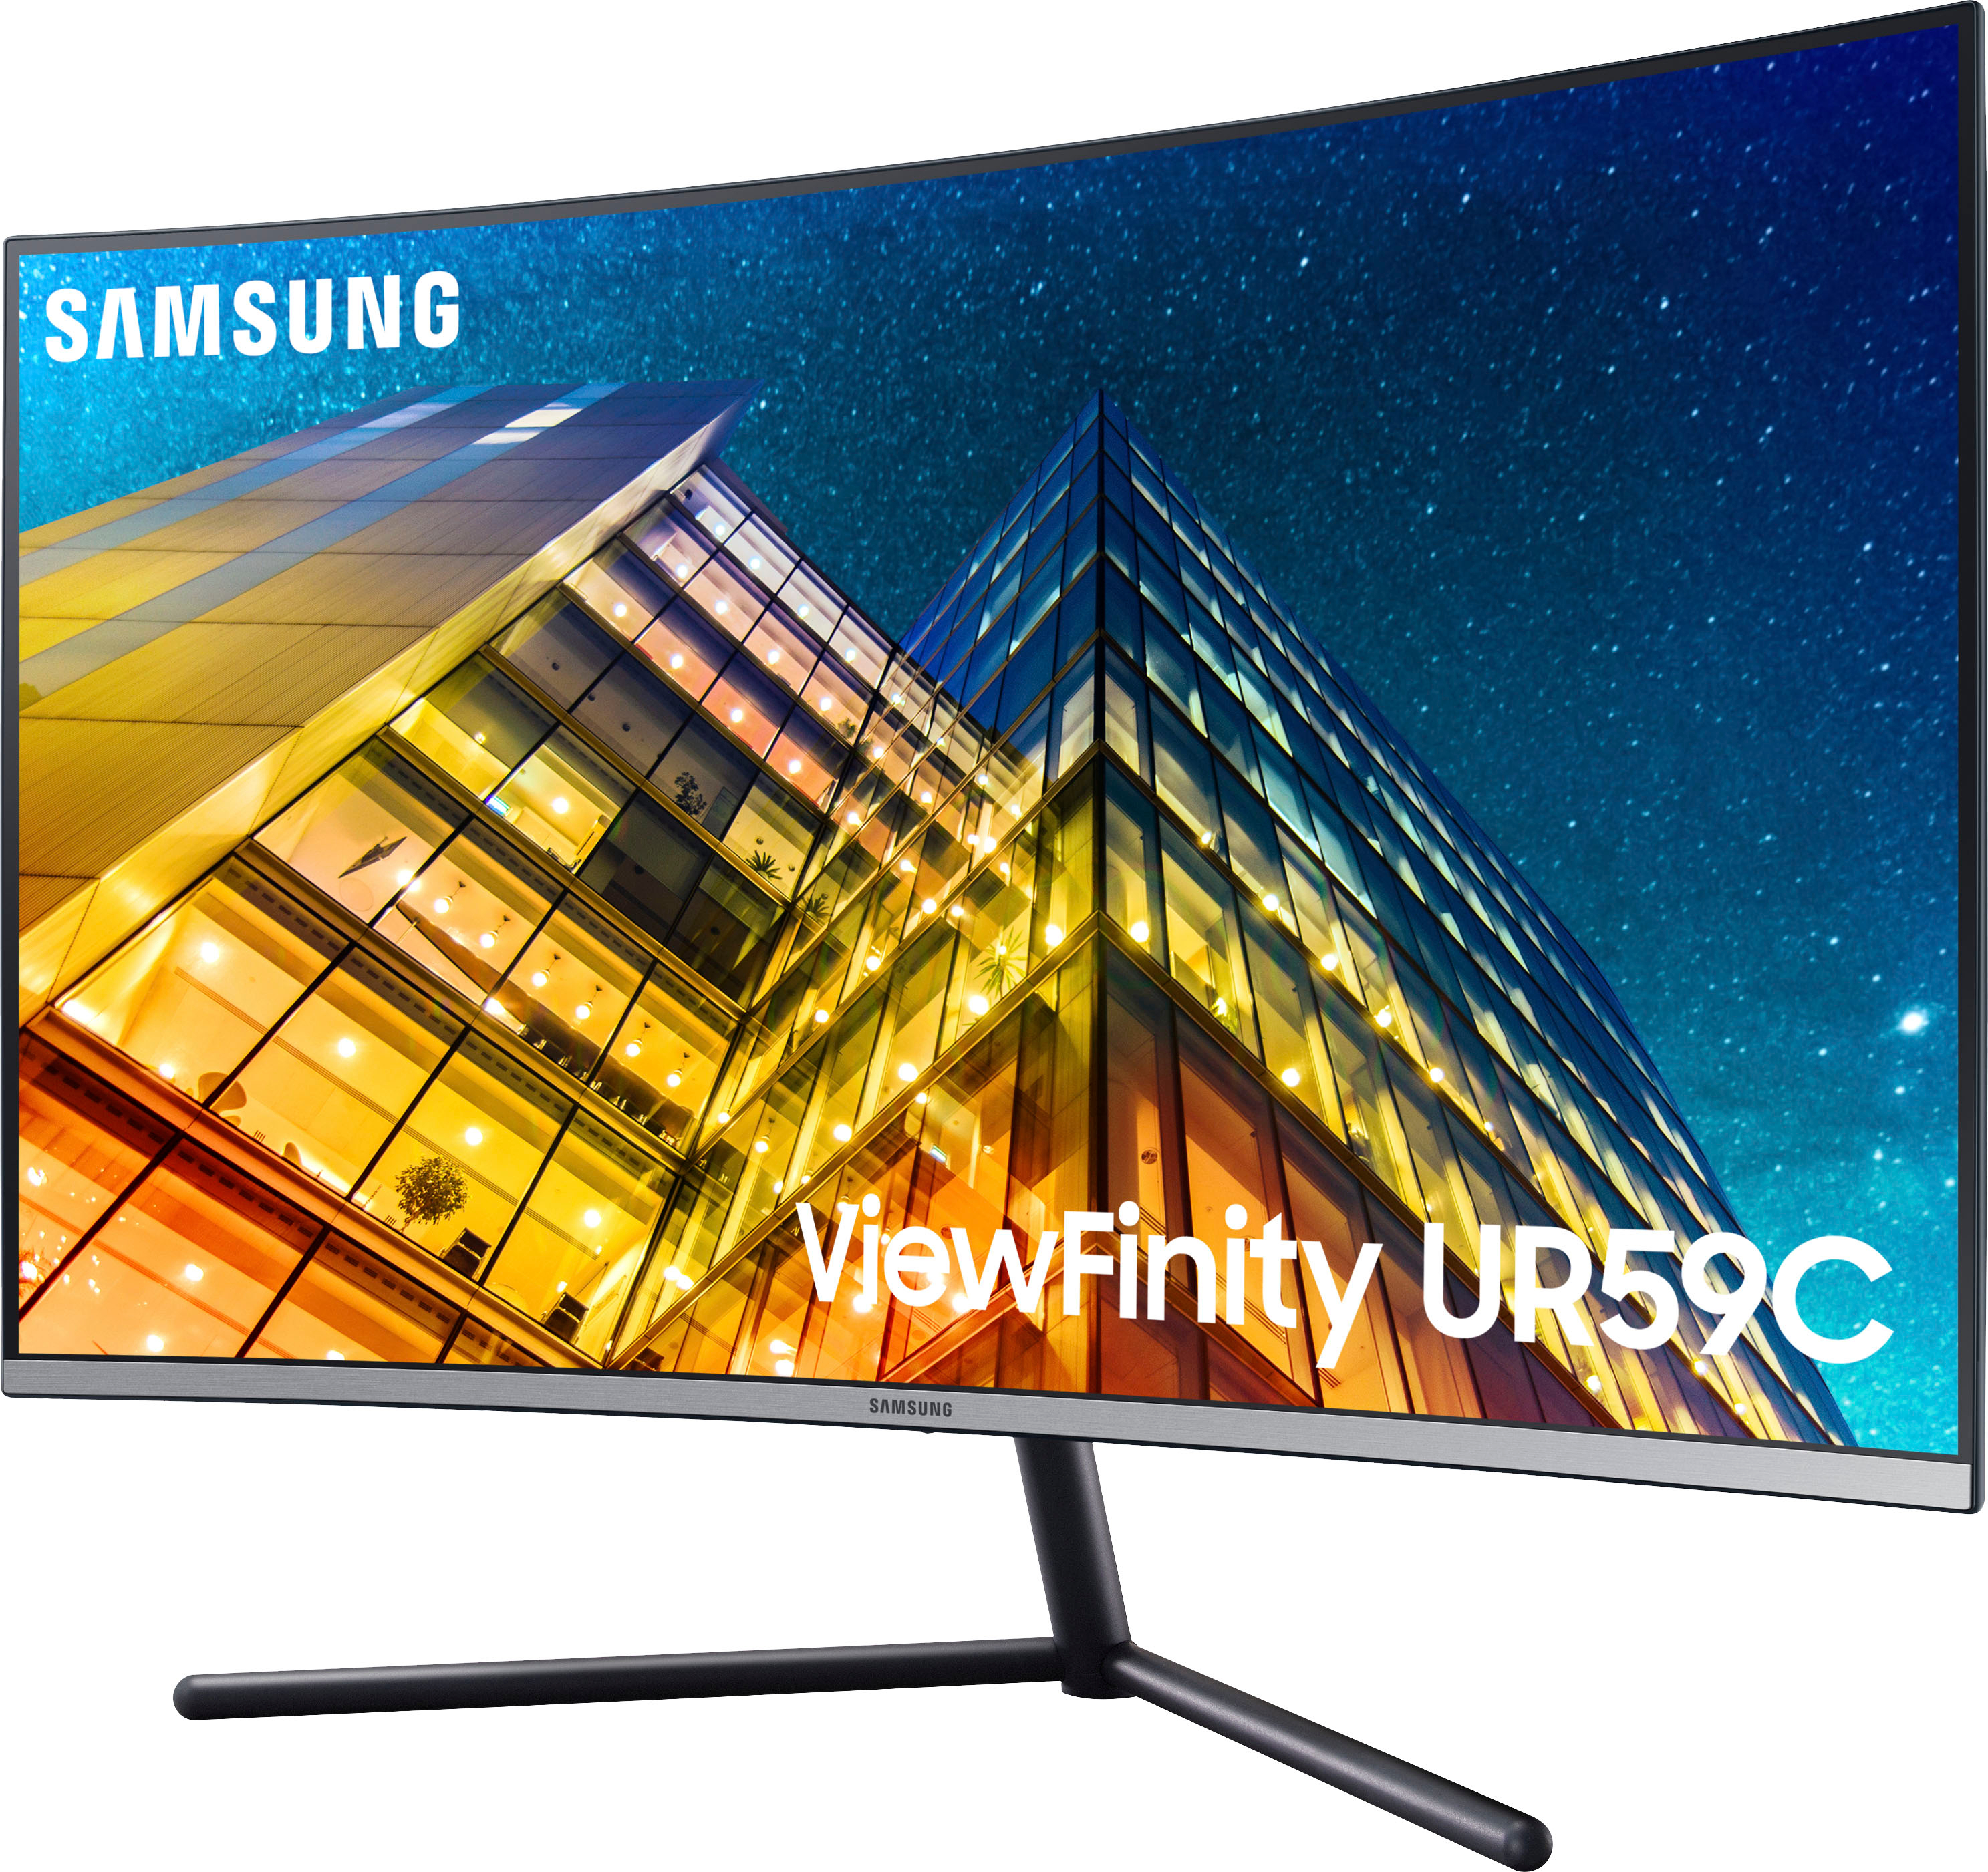 Angle View: Samsung - S60A Series 32” QHD Monitor with HDR (HDMI, USB) - Black